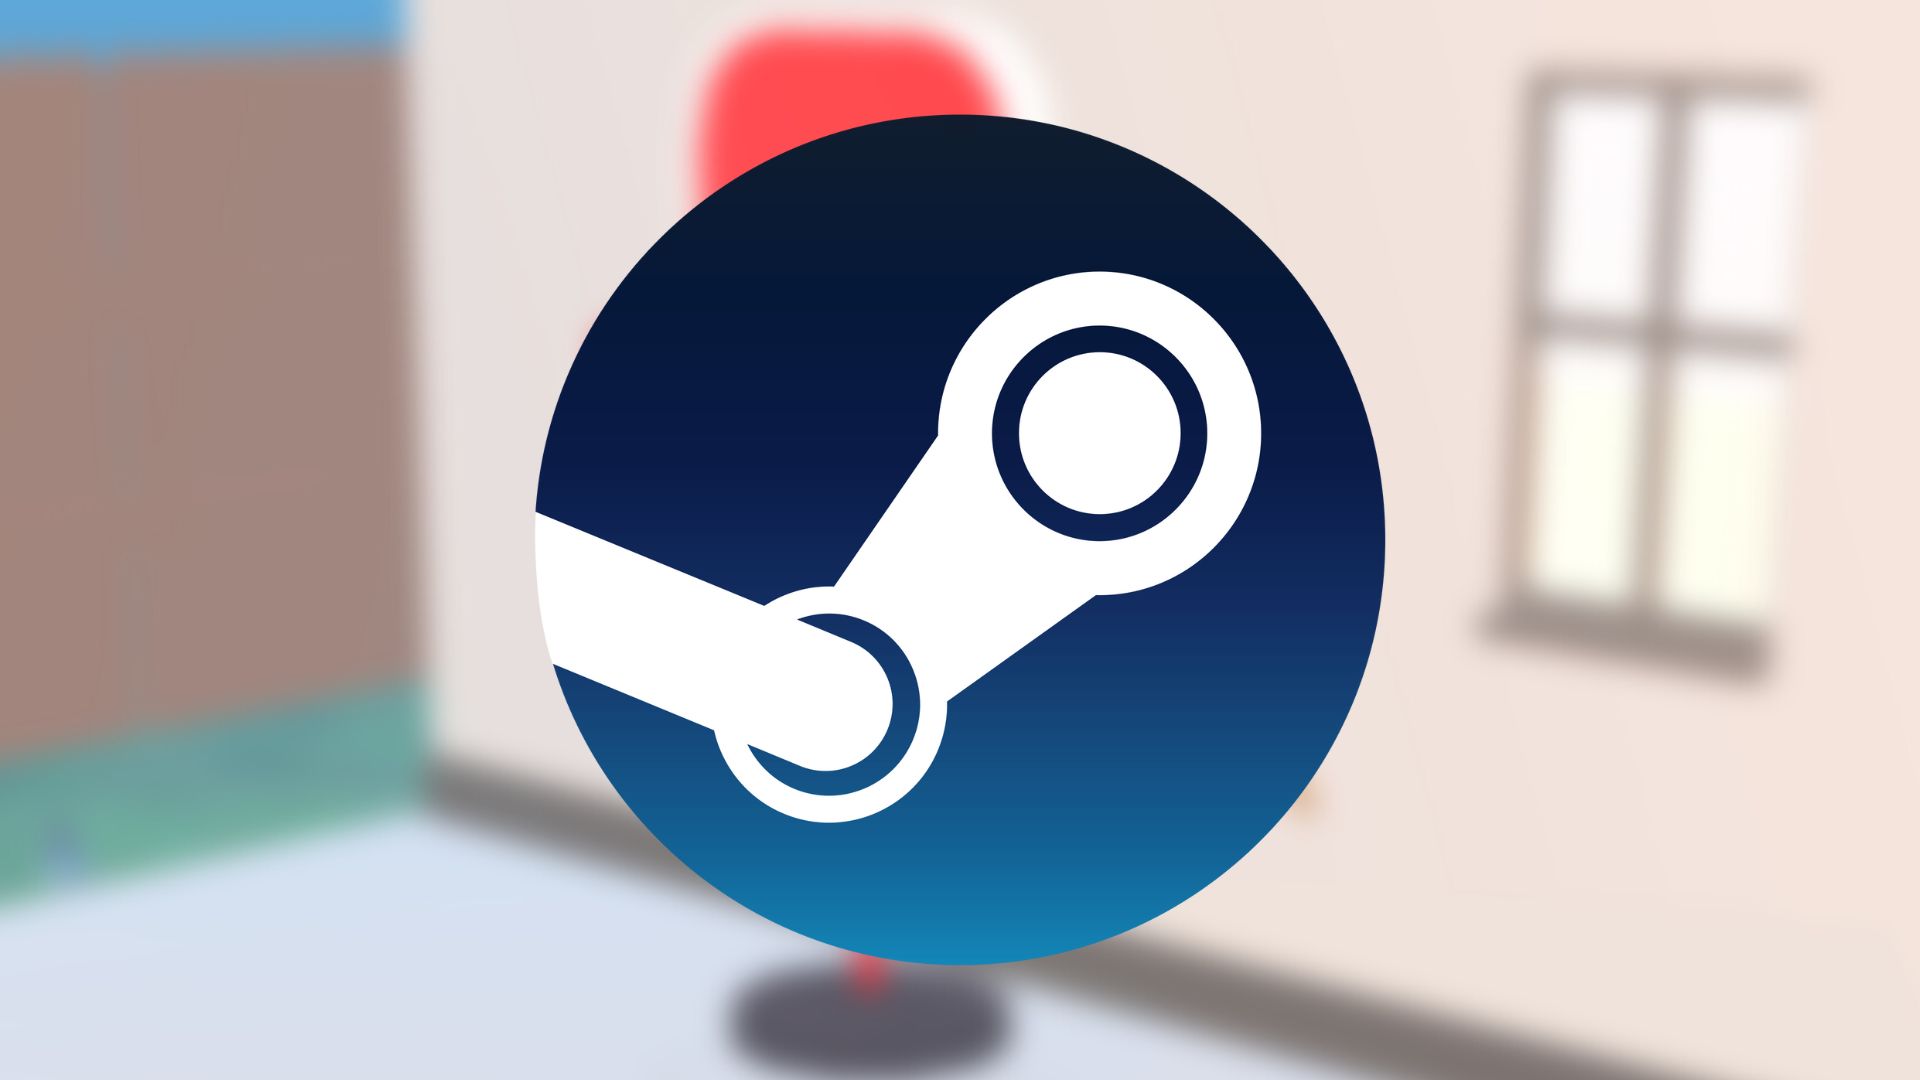 Steam Next Fest is about to return, and the demos have already begun